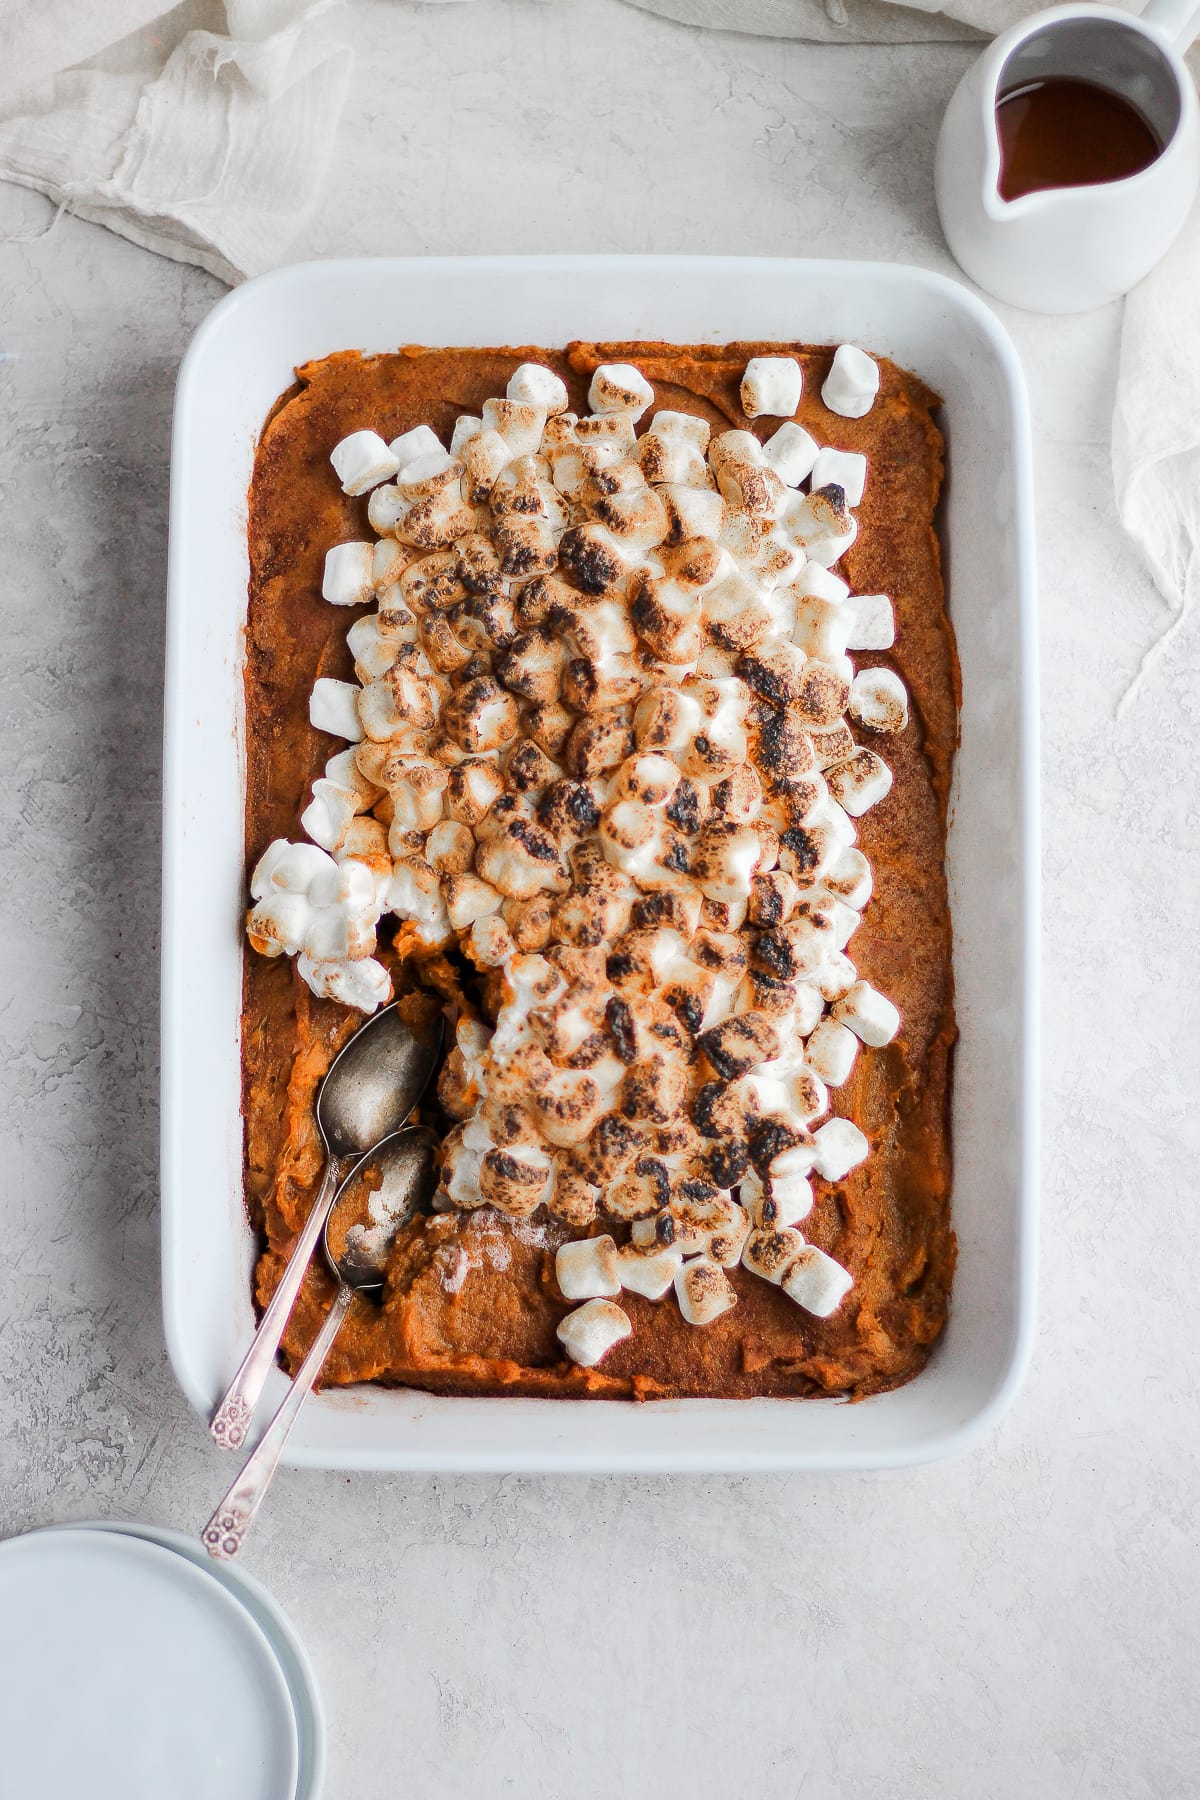 Sweet potato casserole in a white baking dish with two spoons.